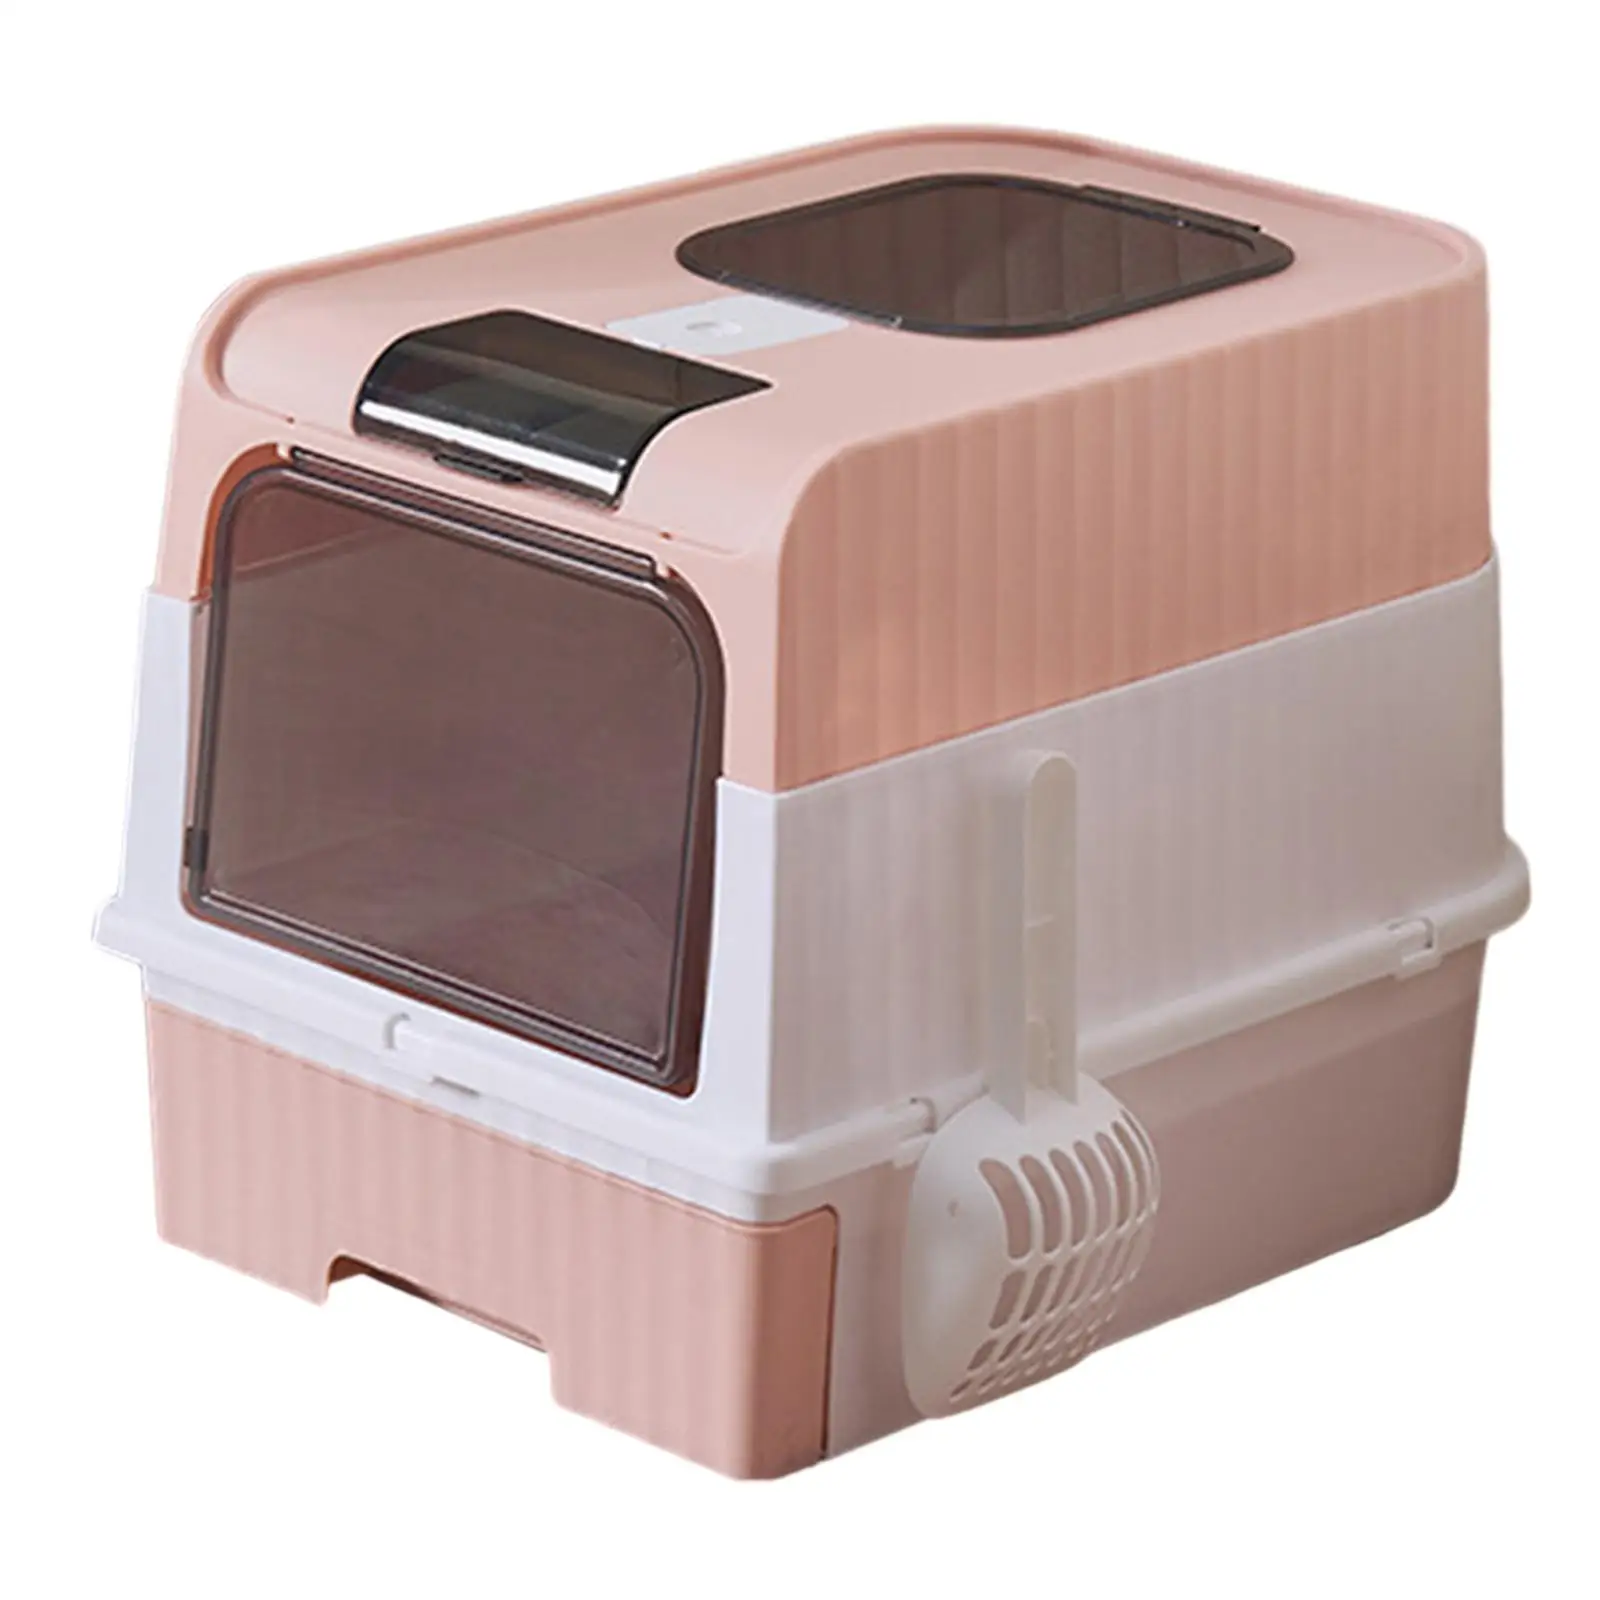 Hooded Cat Litter Boxes with Scoop Portable Removable Easy to Clean Large Enough Kitten Potty for Small, Medium and Large Cat